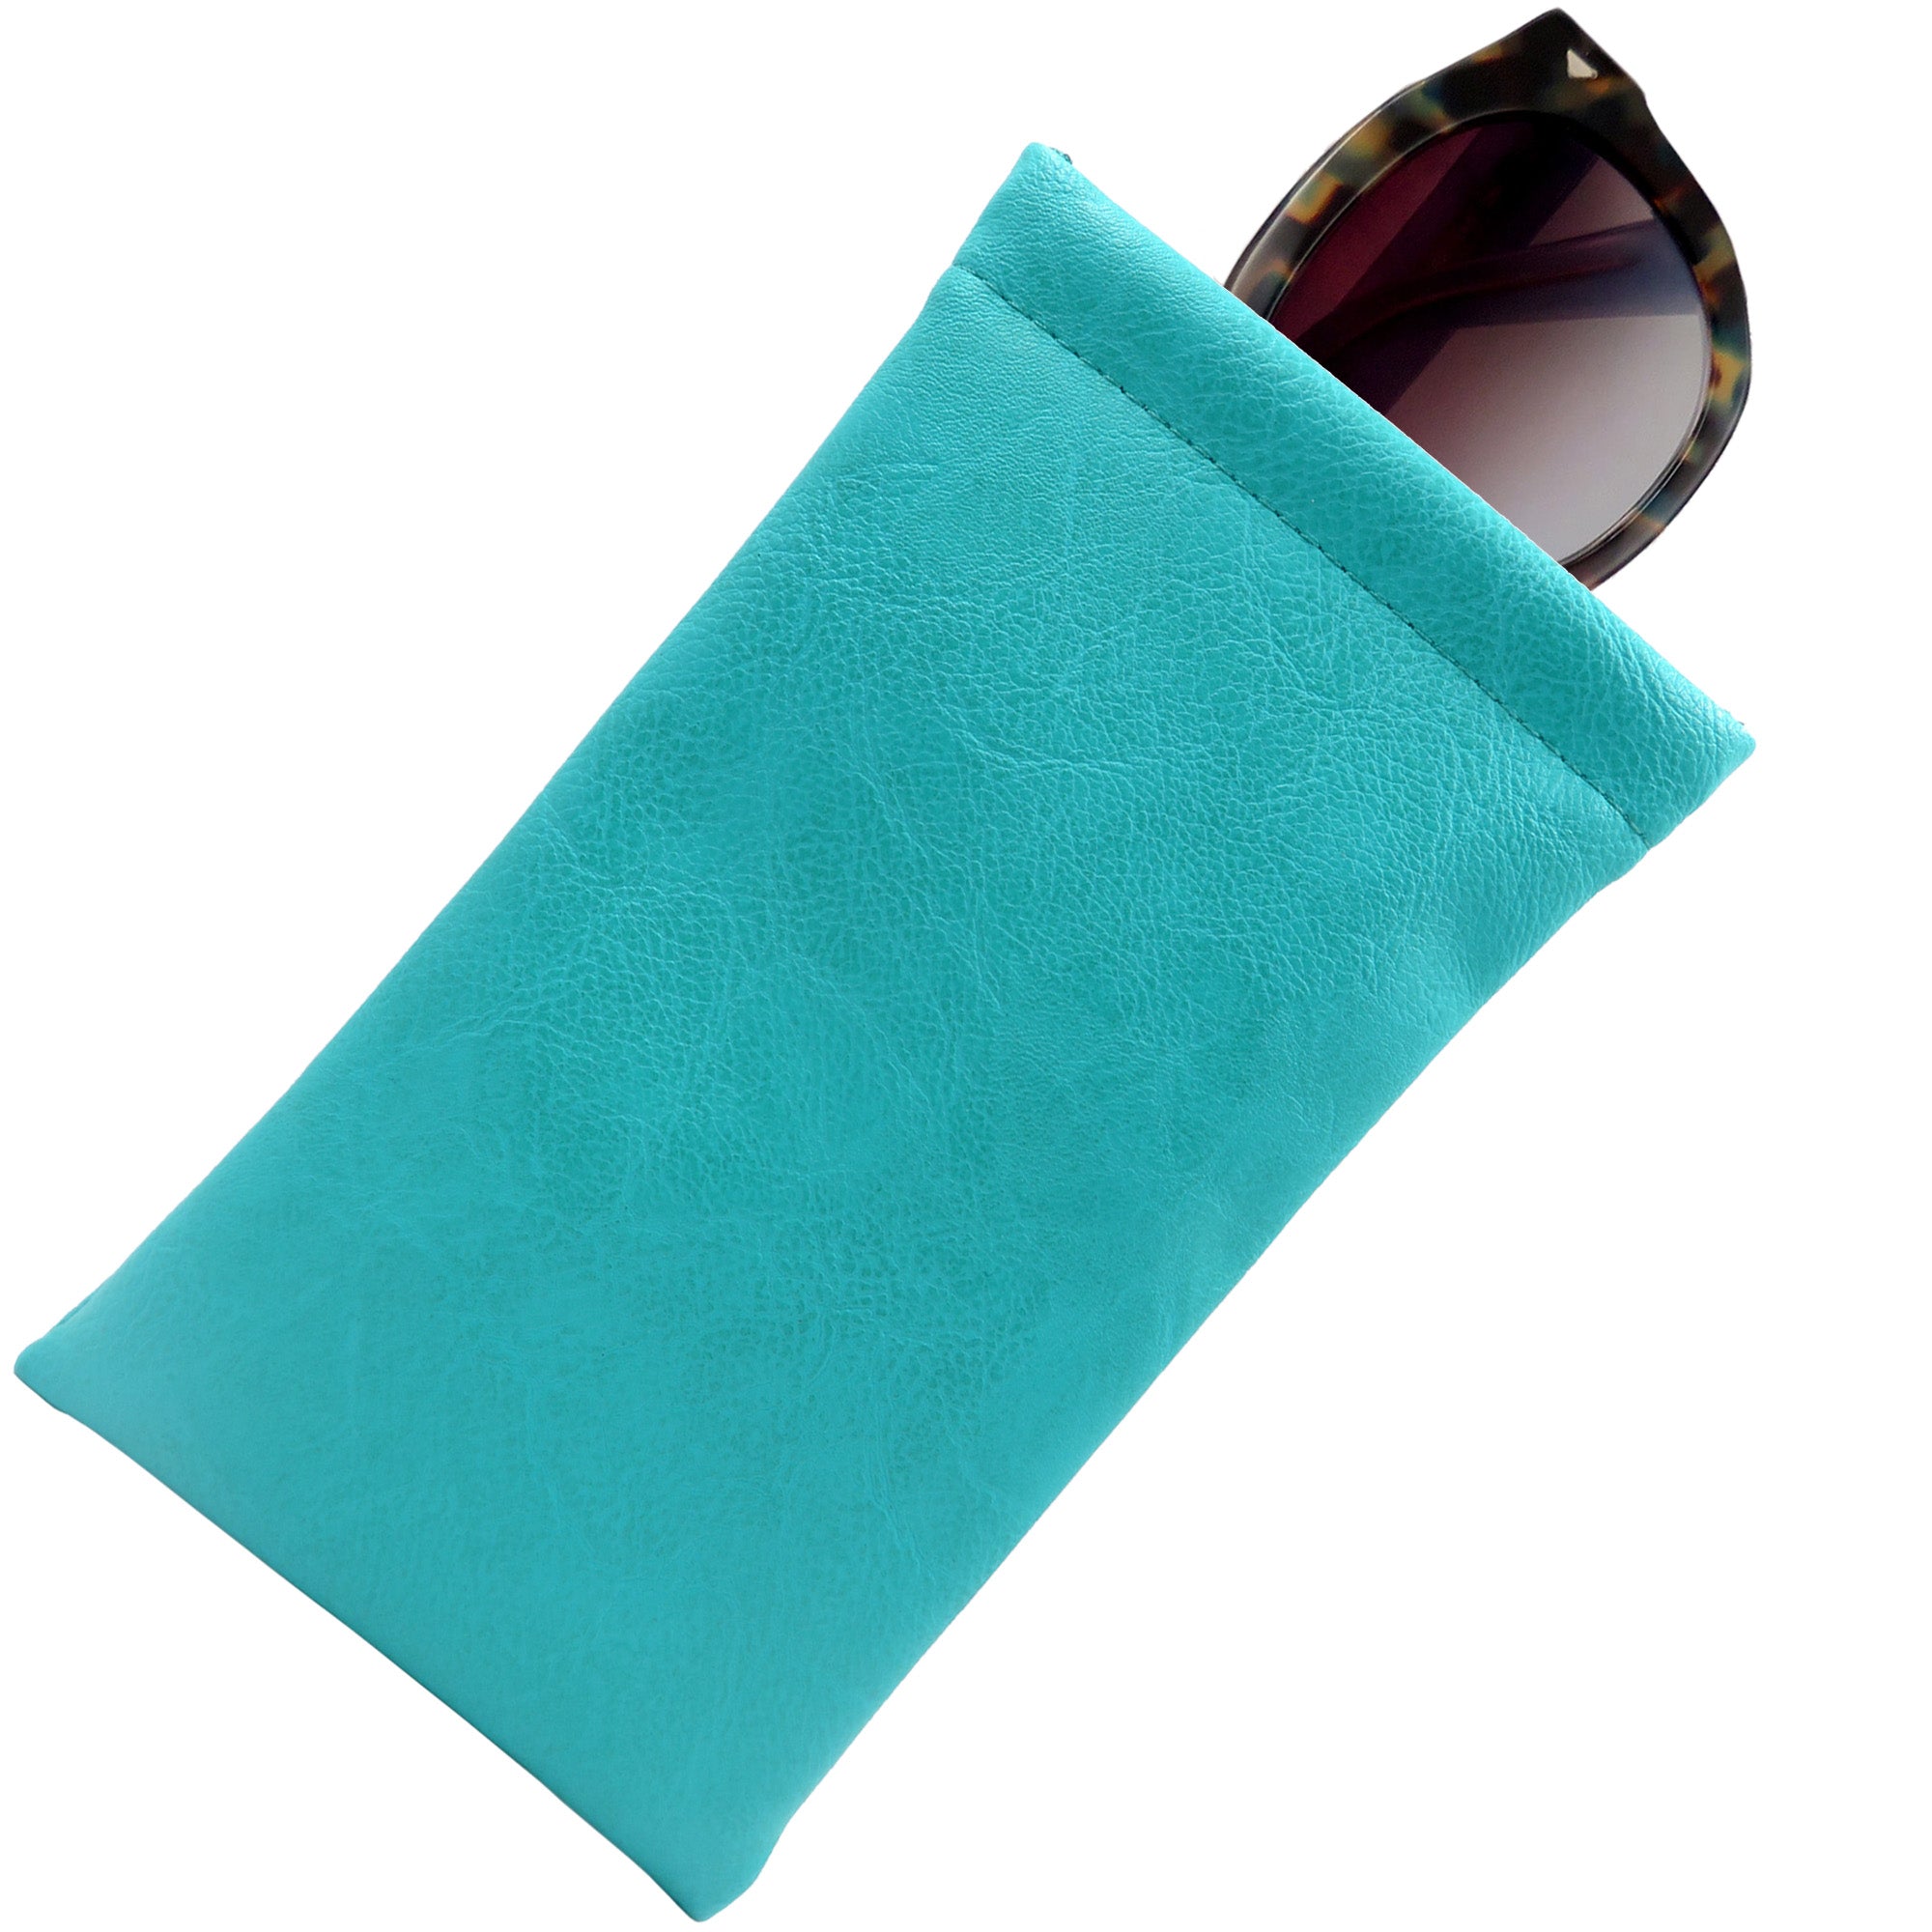 MyEyeglassCase Soft Sunglasses Case | Large Glasses Case Holder - Eyeglass Pouch Squeeze Top | Glasses Pouch Lightweight Extra Layers